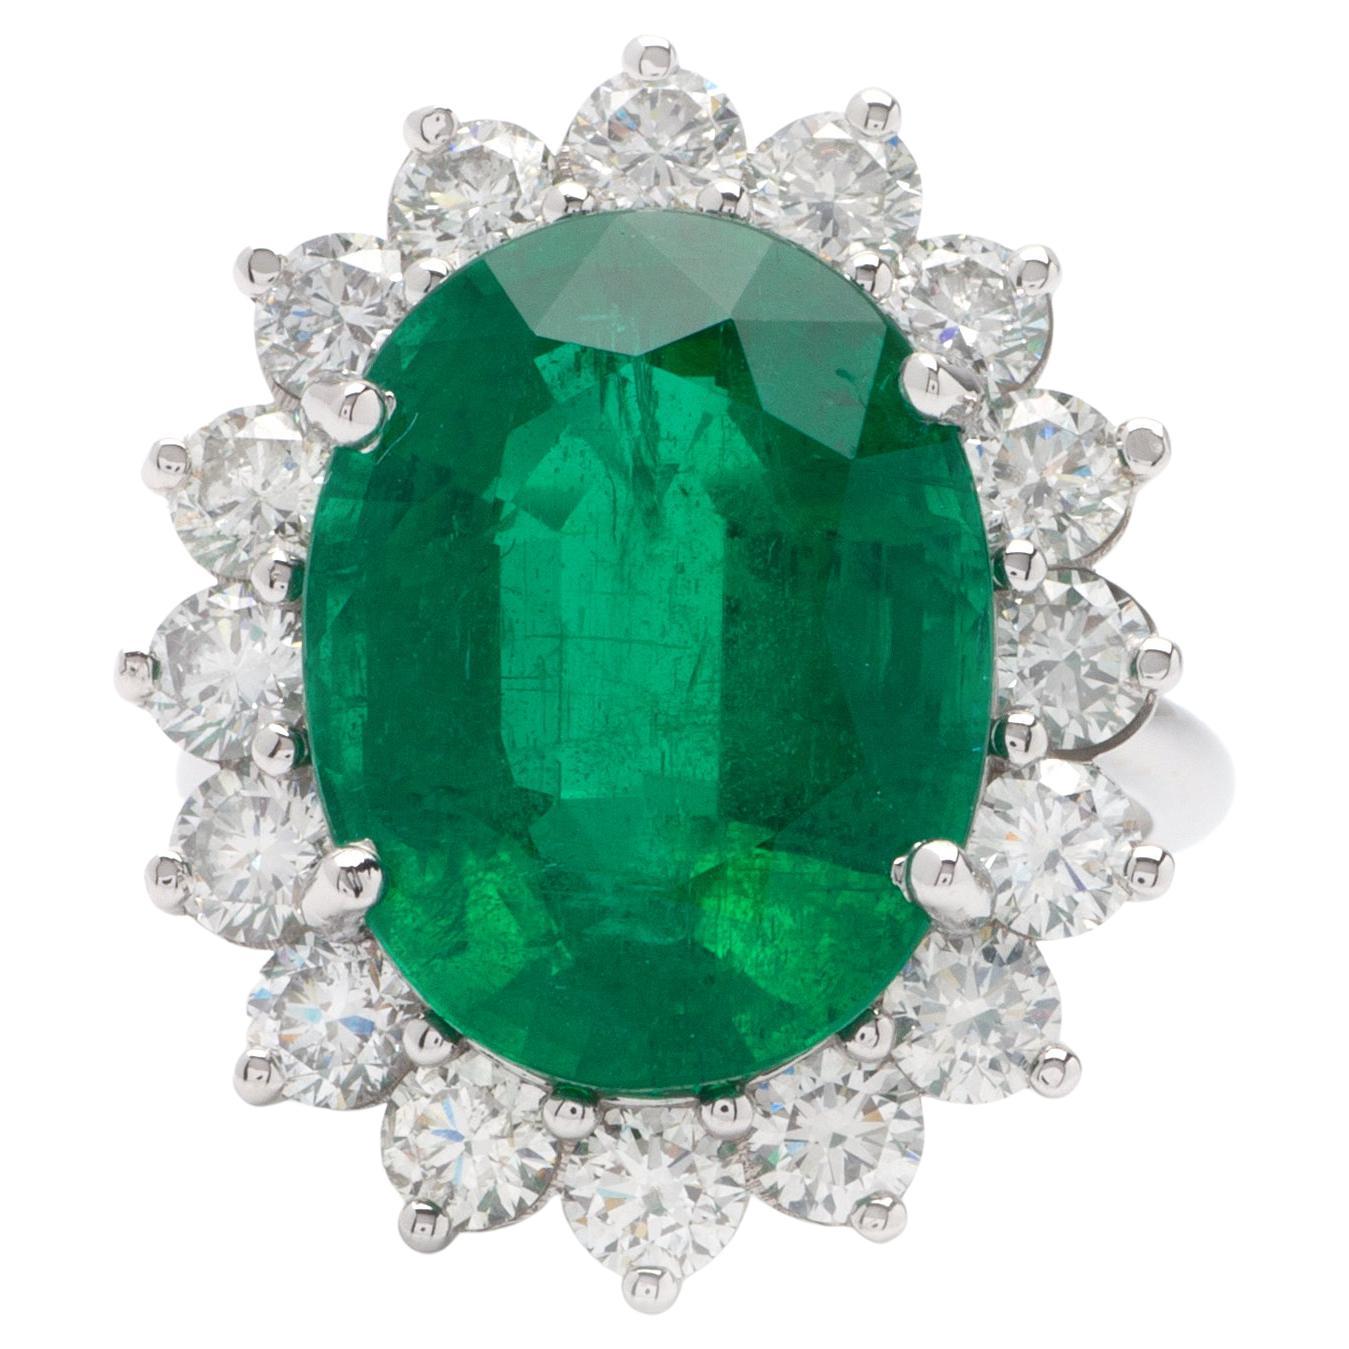 10.64ct Emerald Halo Ring in 14K White Gold, 2.40ct Side Diamonds